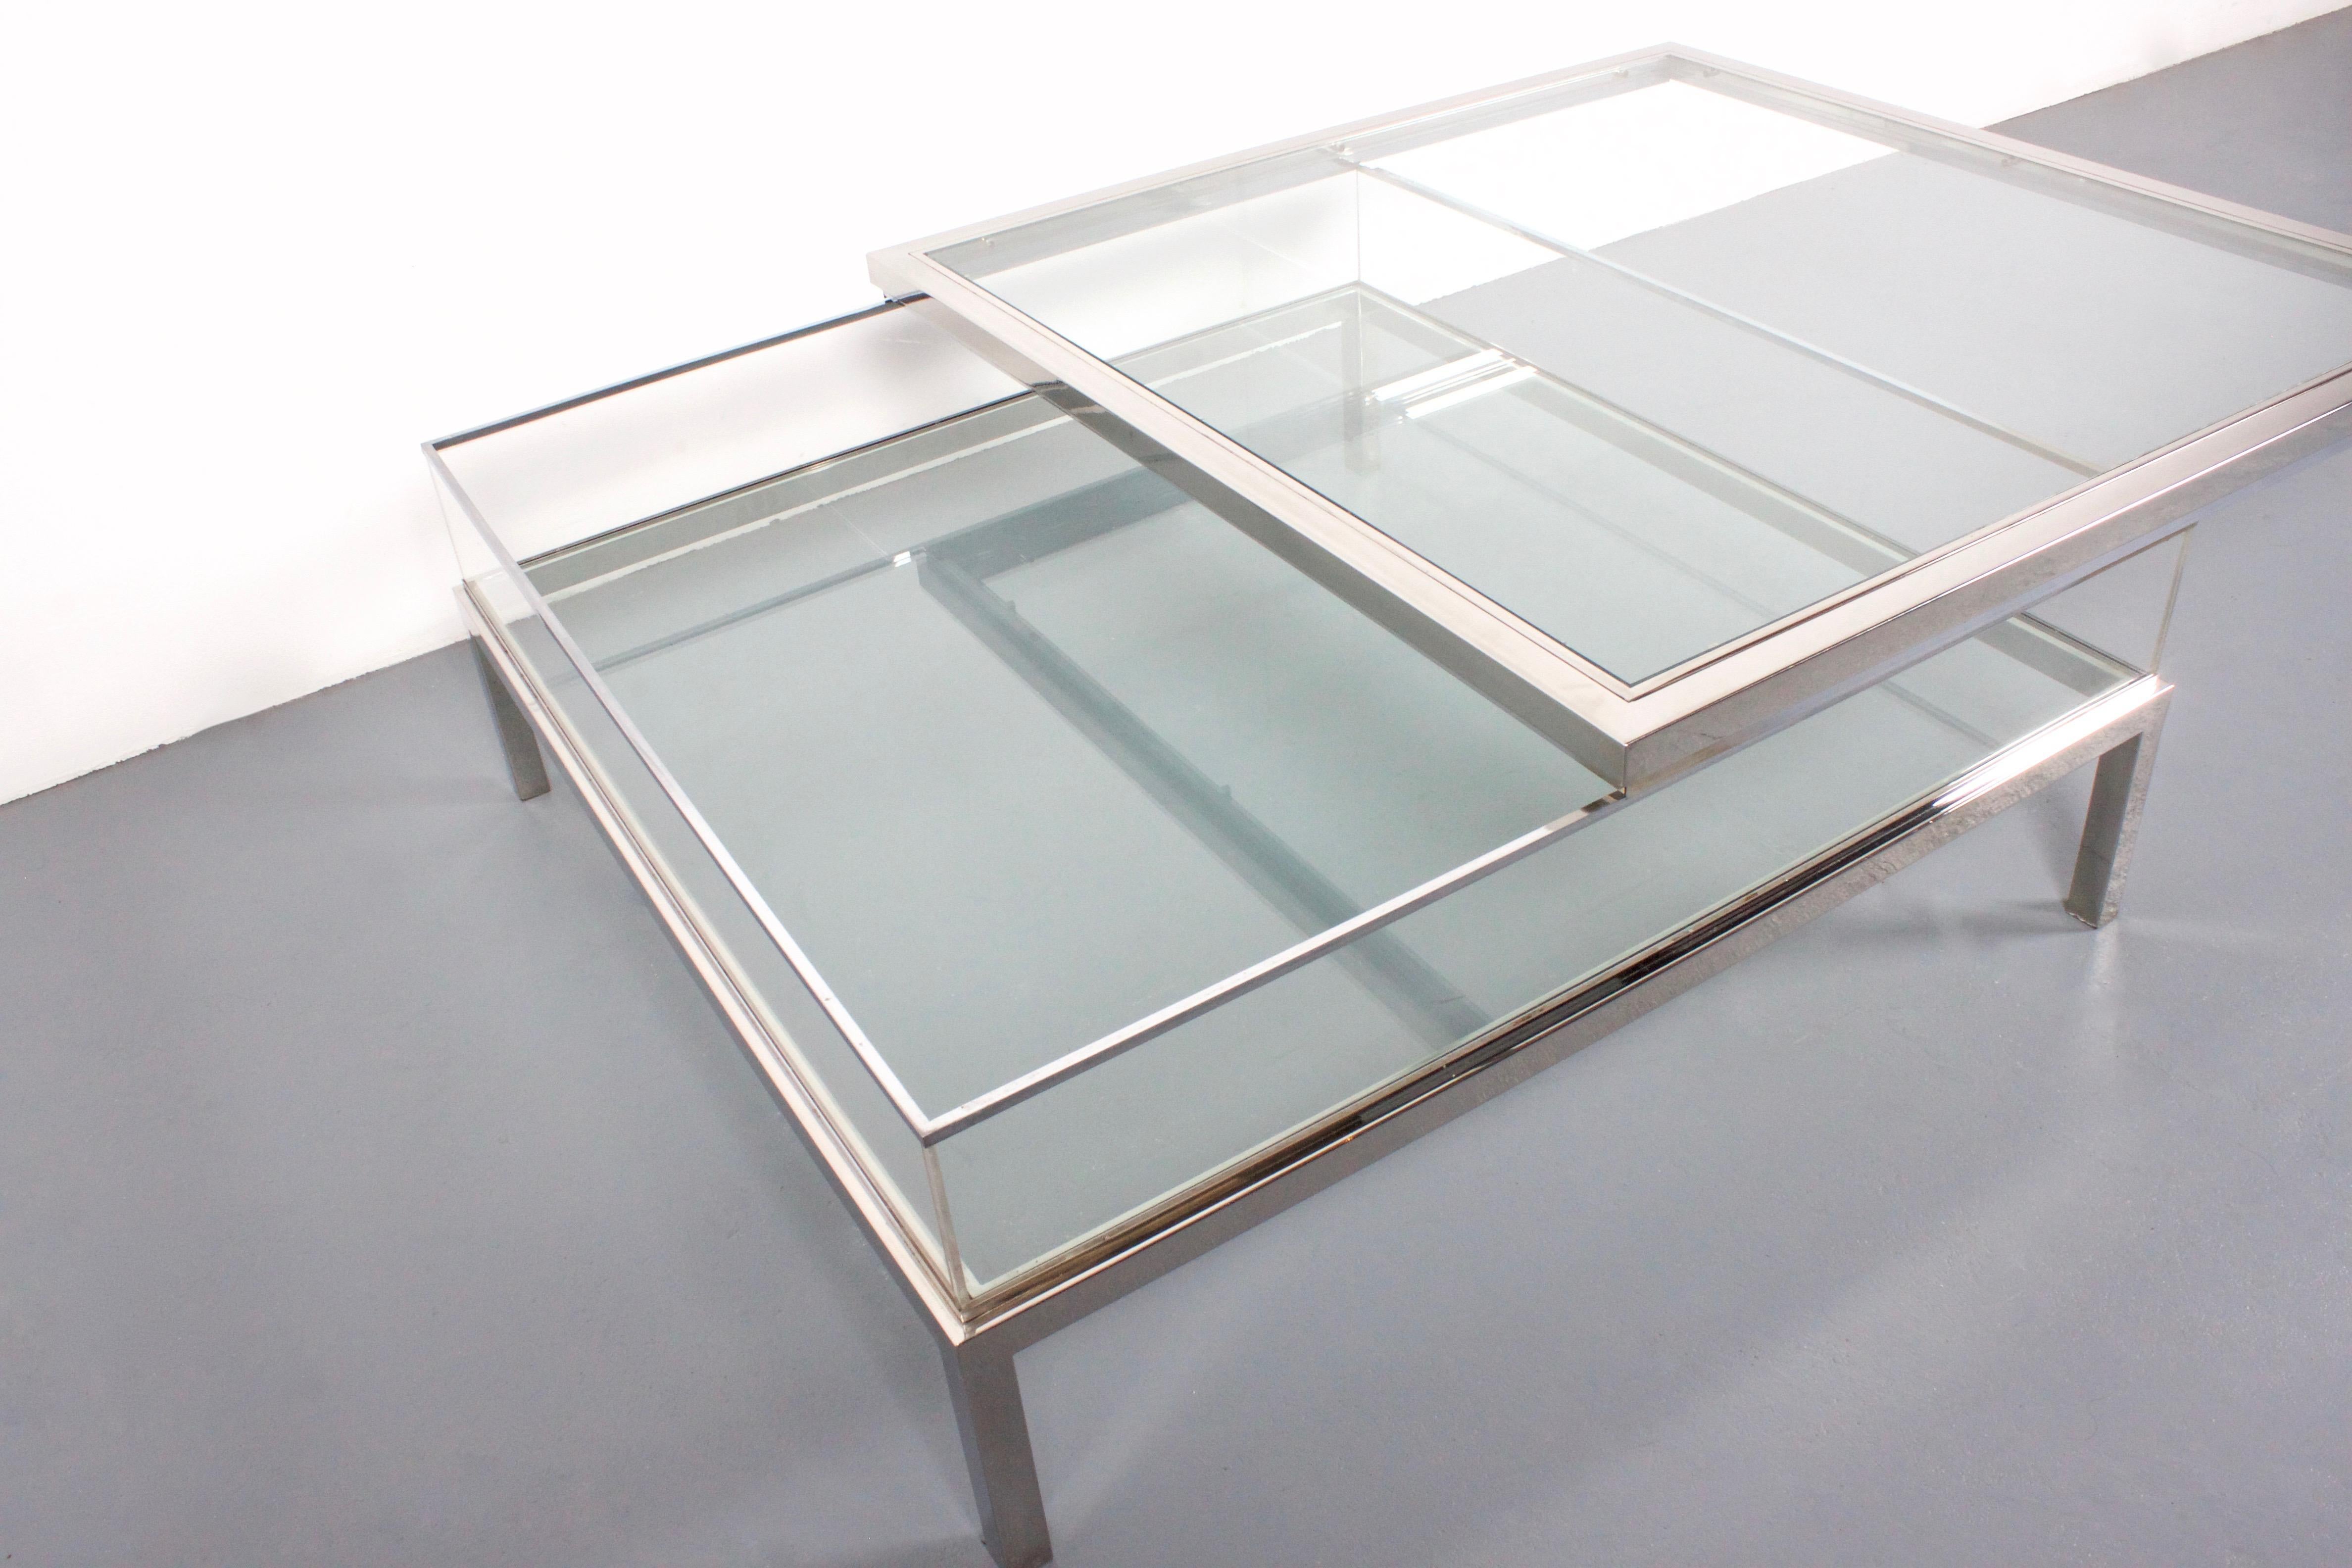 1970s coffee table by Maison Jansen in very good condition. 

Chrome with glass tops and Lucite walls. 

The top can slide open to reveal the inside compartment that can be used as a vitrine for books and magazines. 

This table is very heavy and